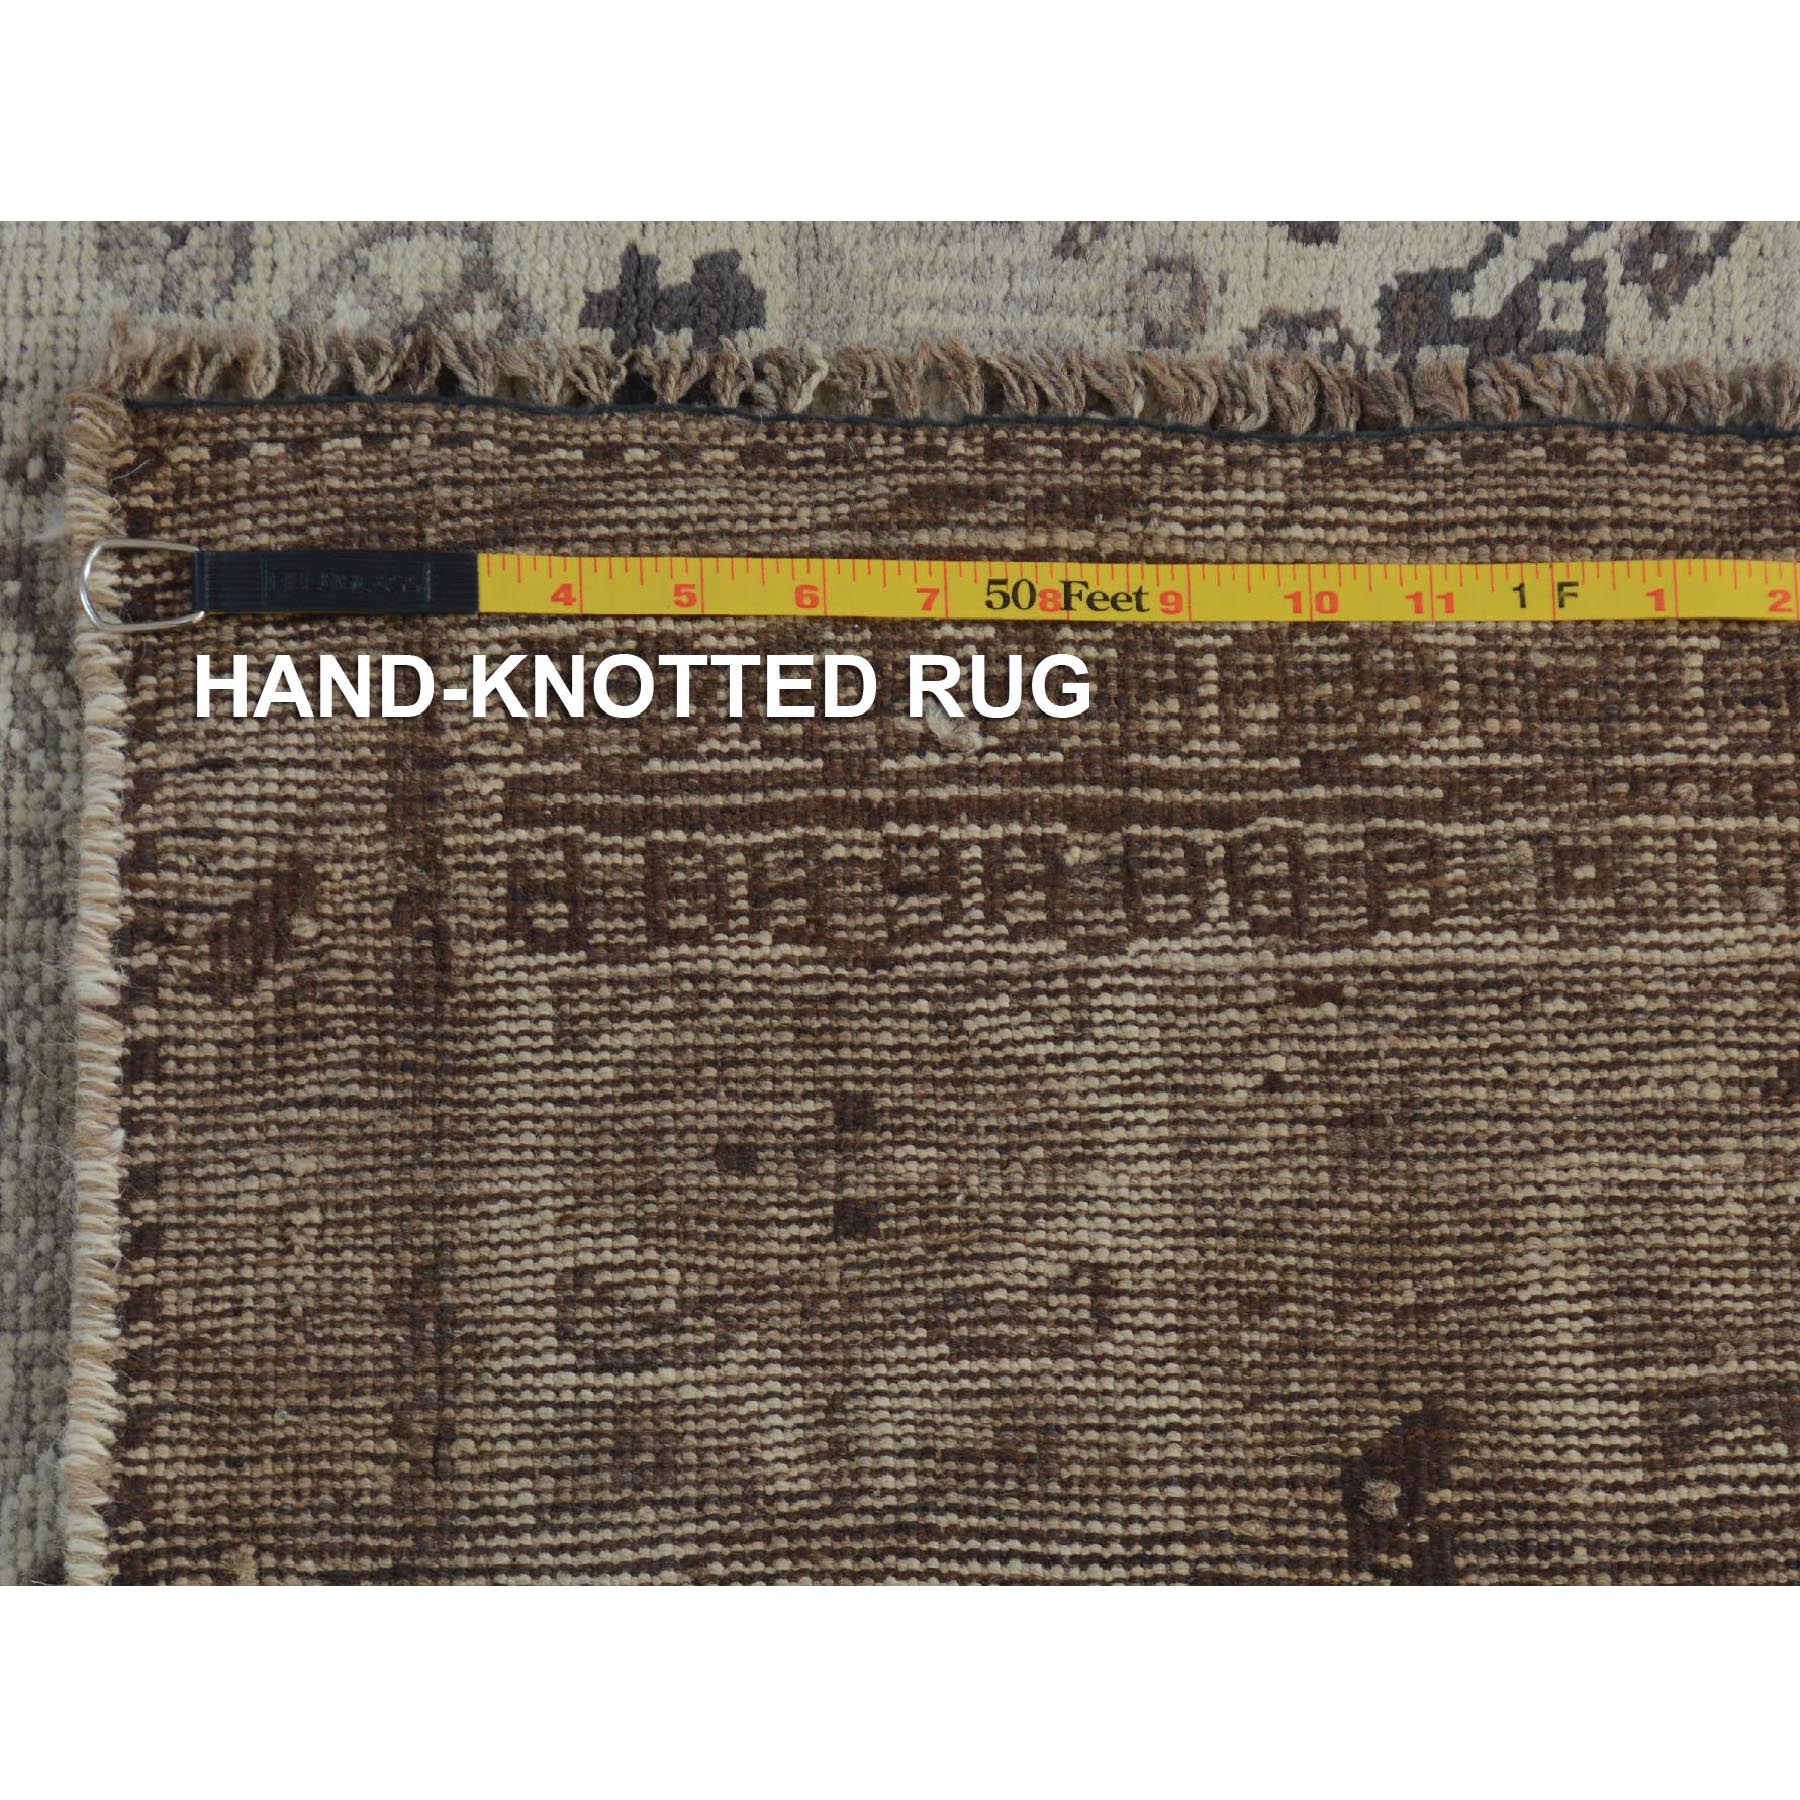 5-8 x8-6  Washed Out Vintage And Worn Down Persian Qashqai Pure Wool Hand Knotted Oriental Rug 